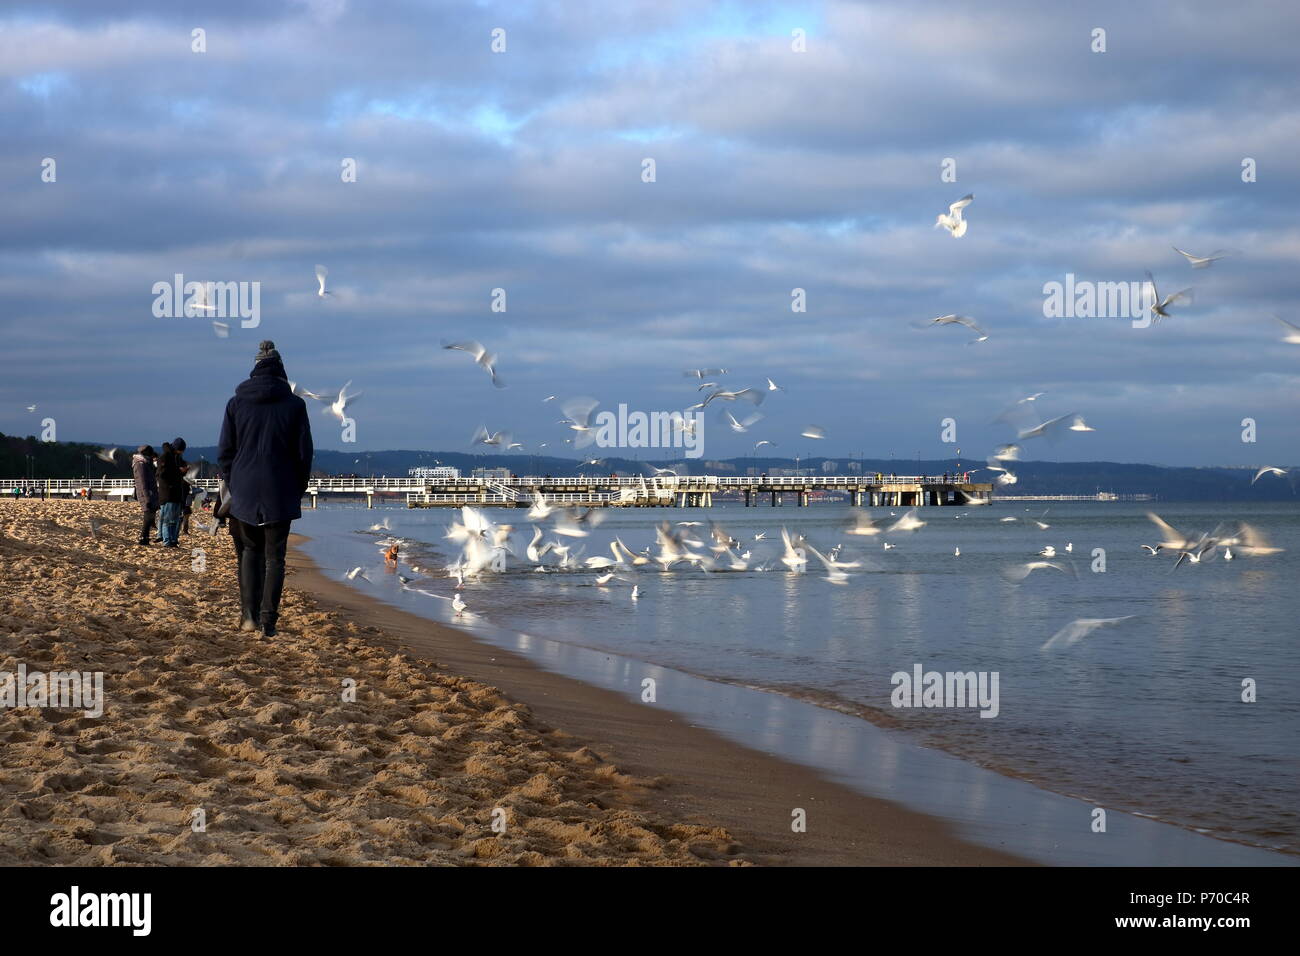 Sea, sea birds fly, people walk on sandy beach, cold weather, cloudy sky, people dressed in jackets and hats Stock Photo